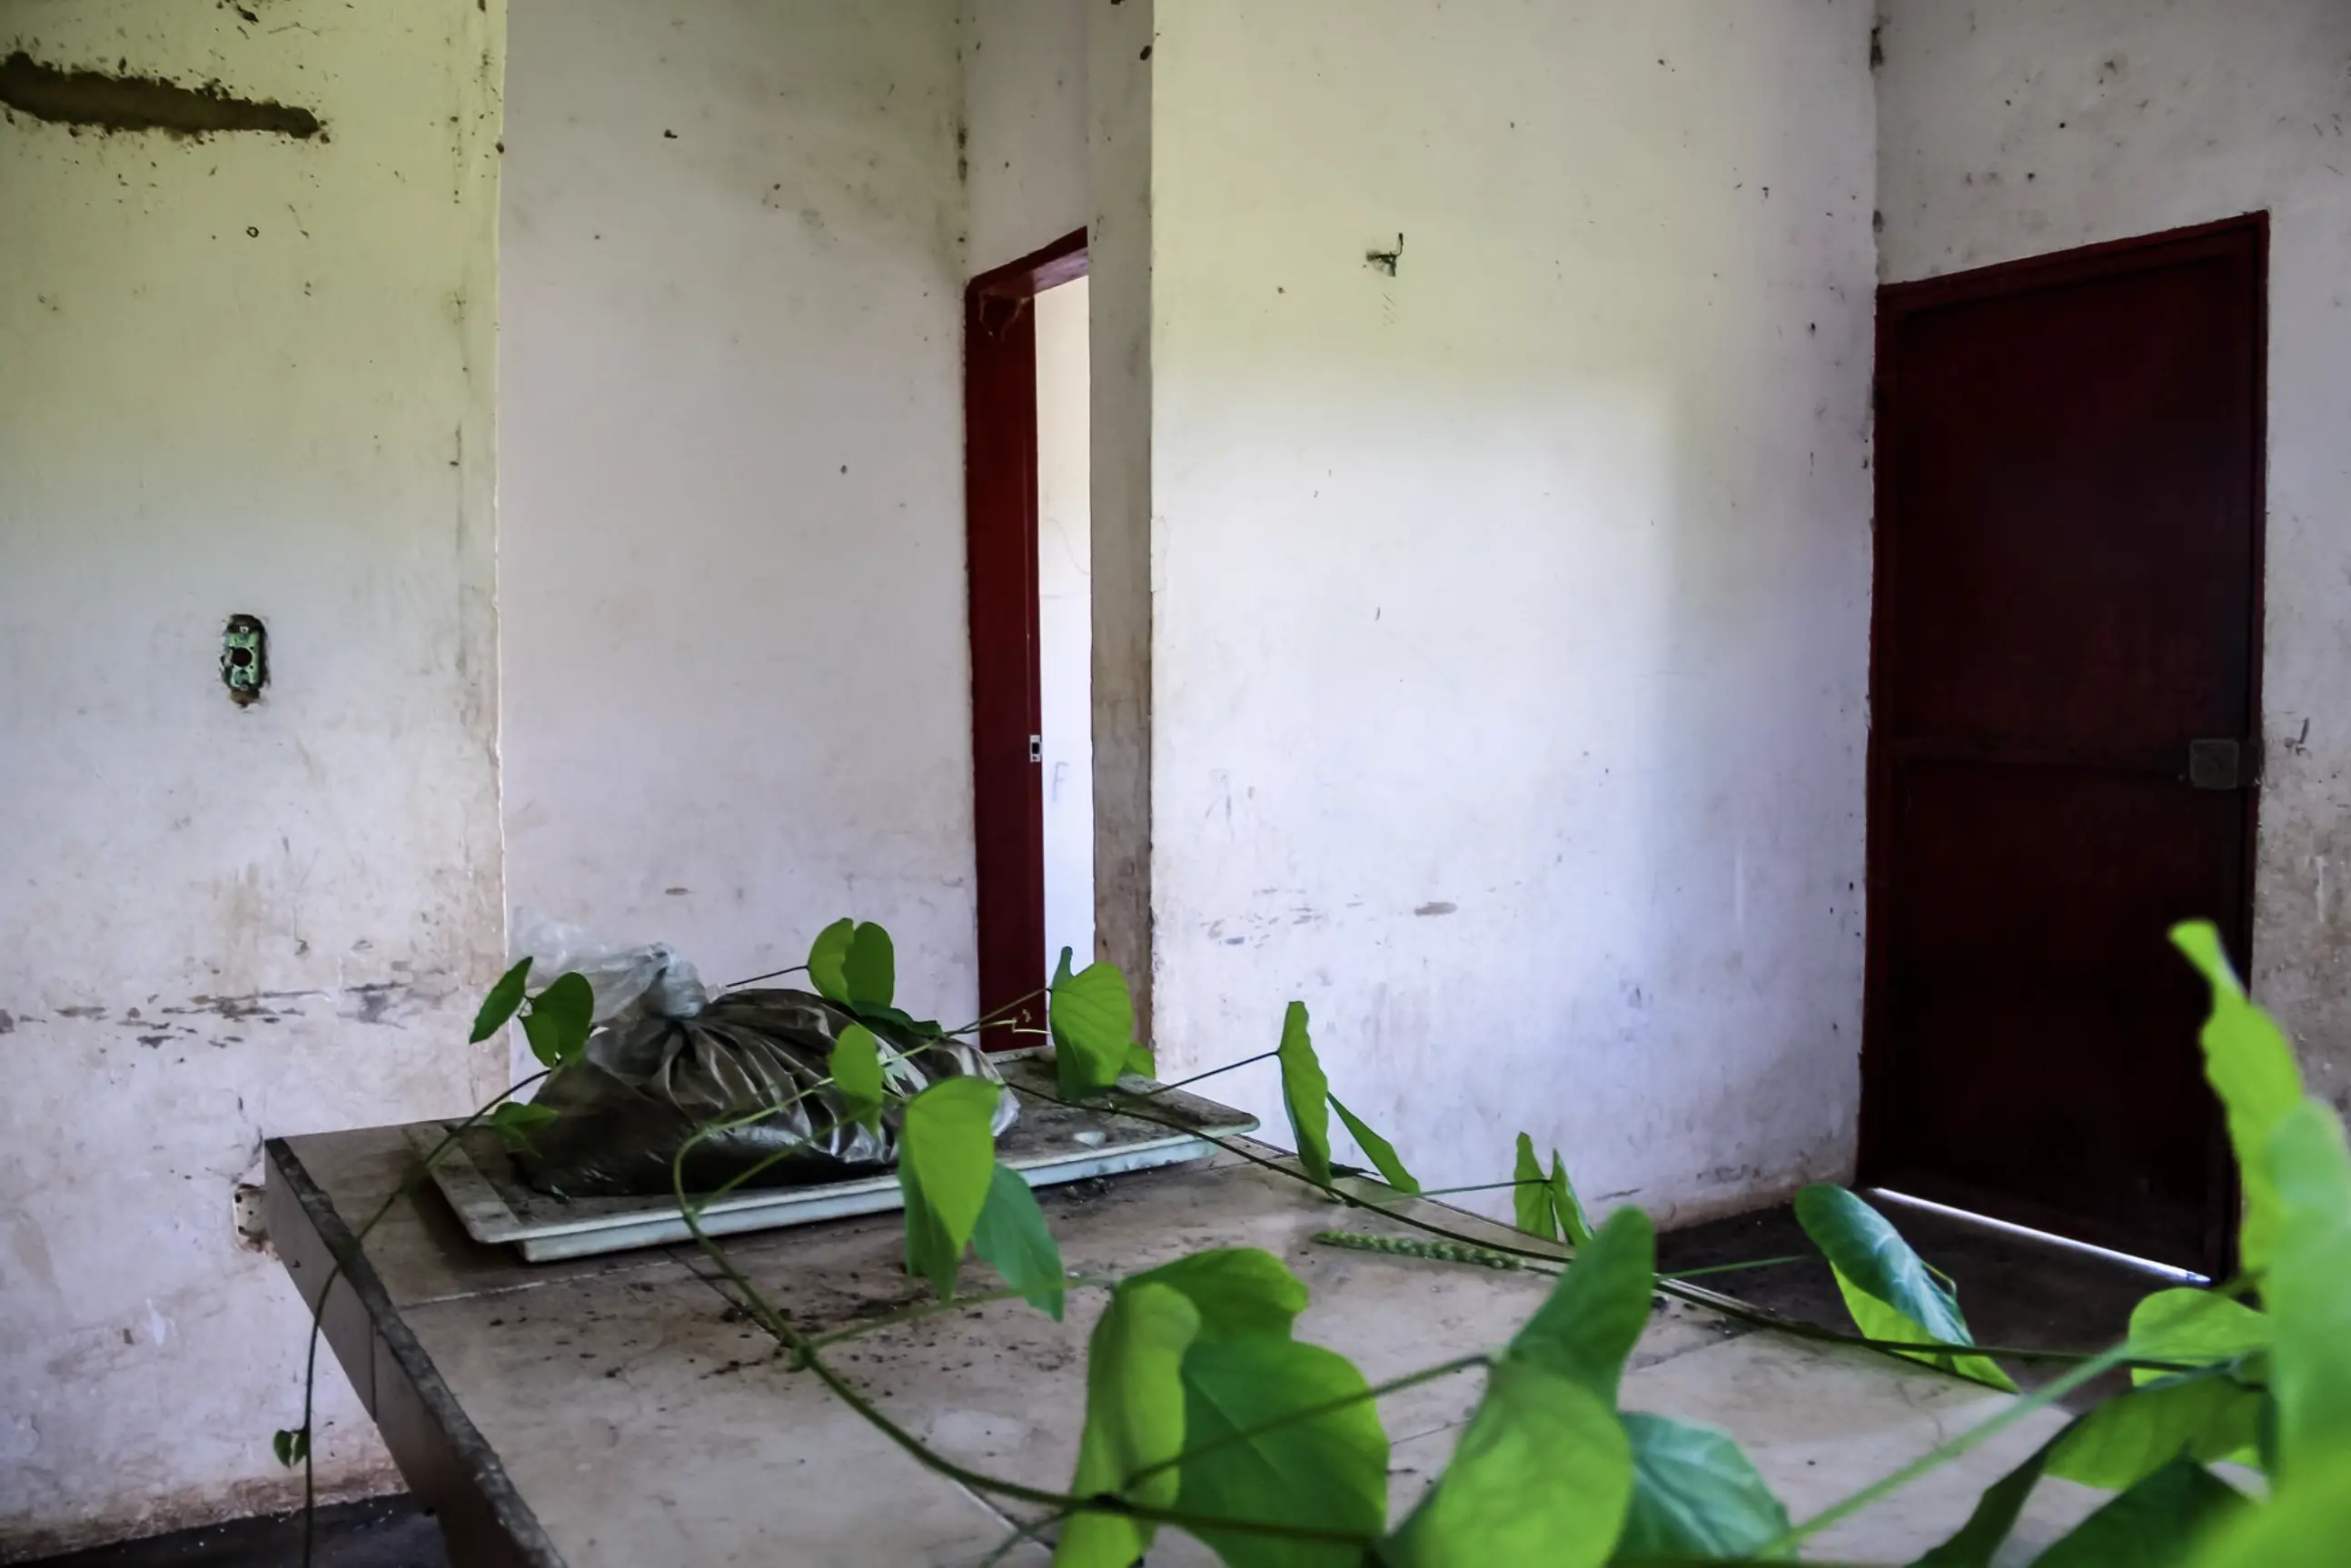 A vine grows over a table upon which a plastic bag is tied up. the walls are dirty and the light switch has been removed. 